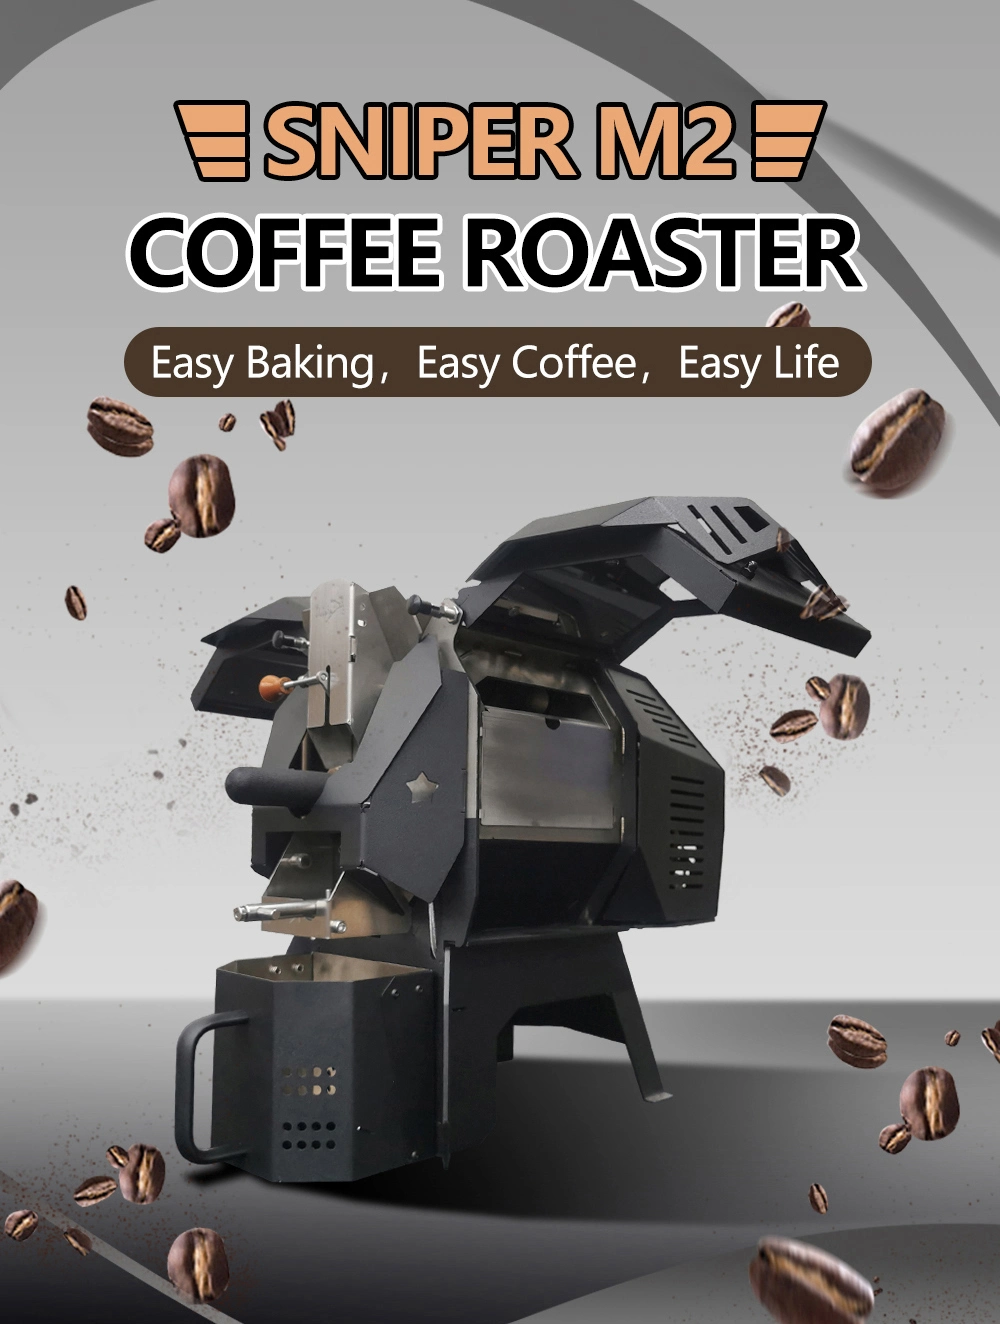 400g Beans Hatch Portable Small Digital Household Small Coffee Roaster in China Best Price